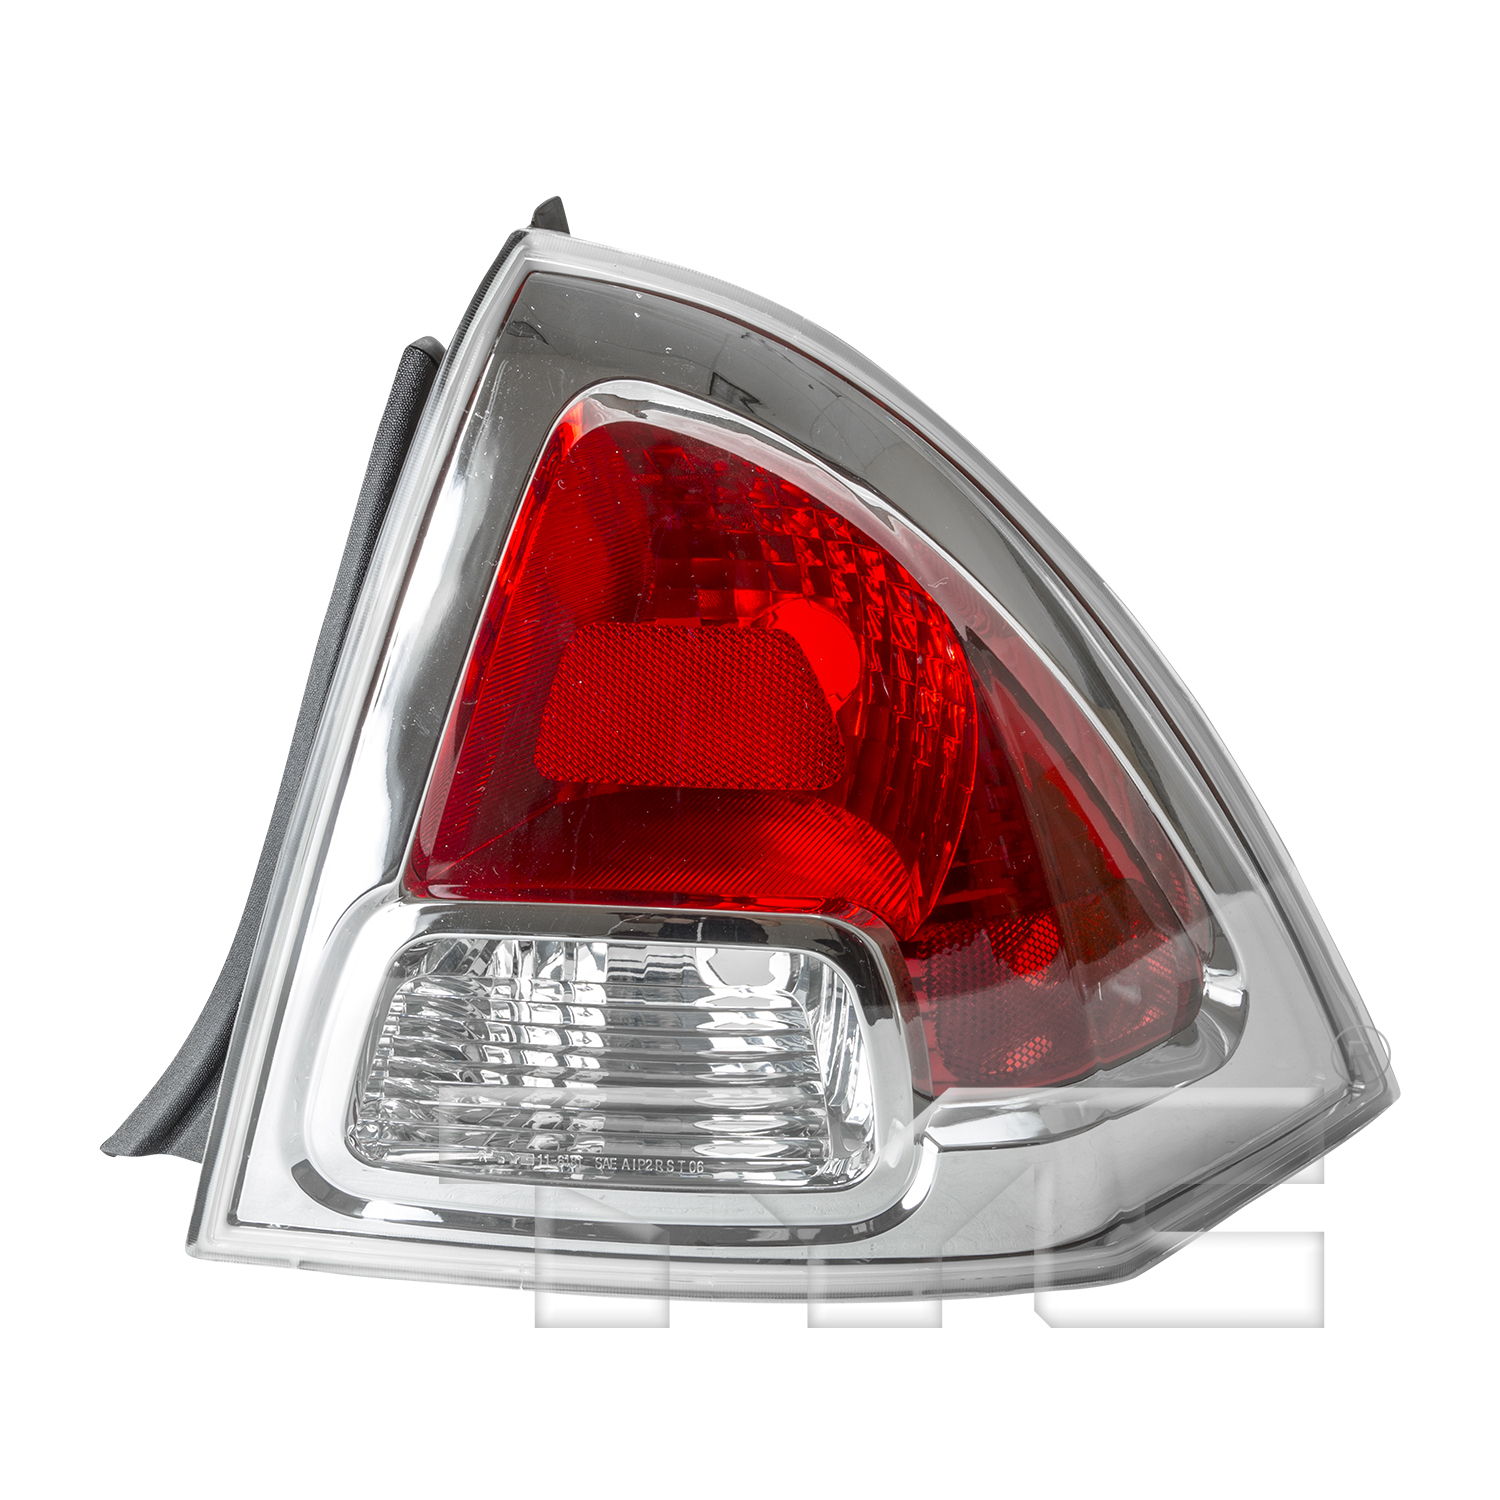 Aftermarket TAILLIGHTS for FORD - FUSION, FUSION,06-09,RT Taillamp lens/housing